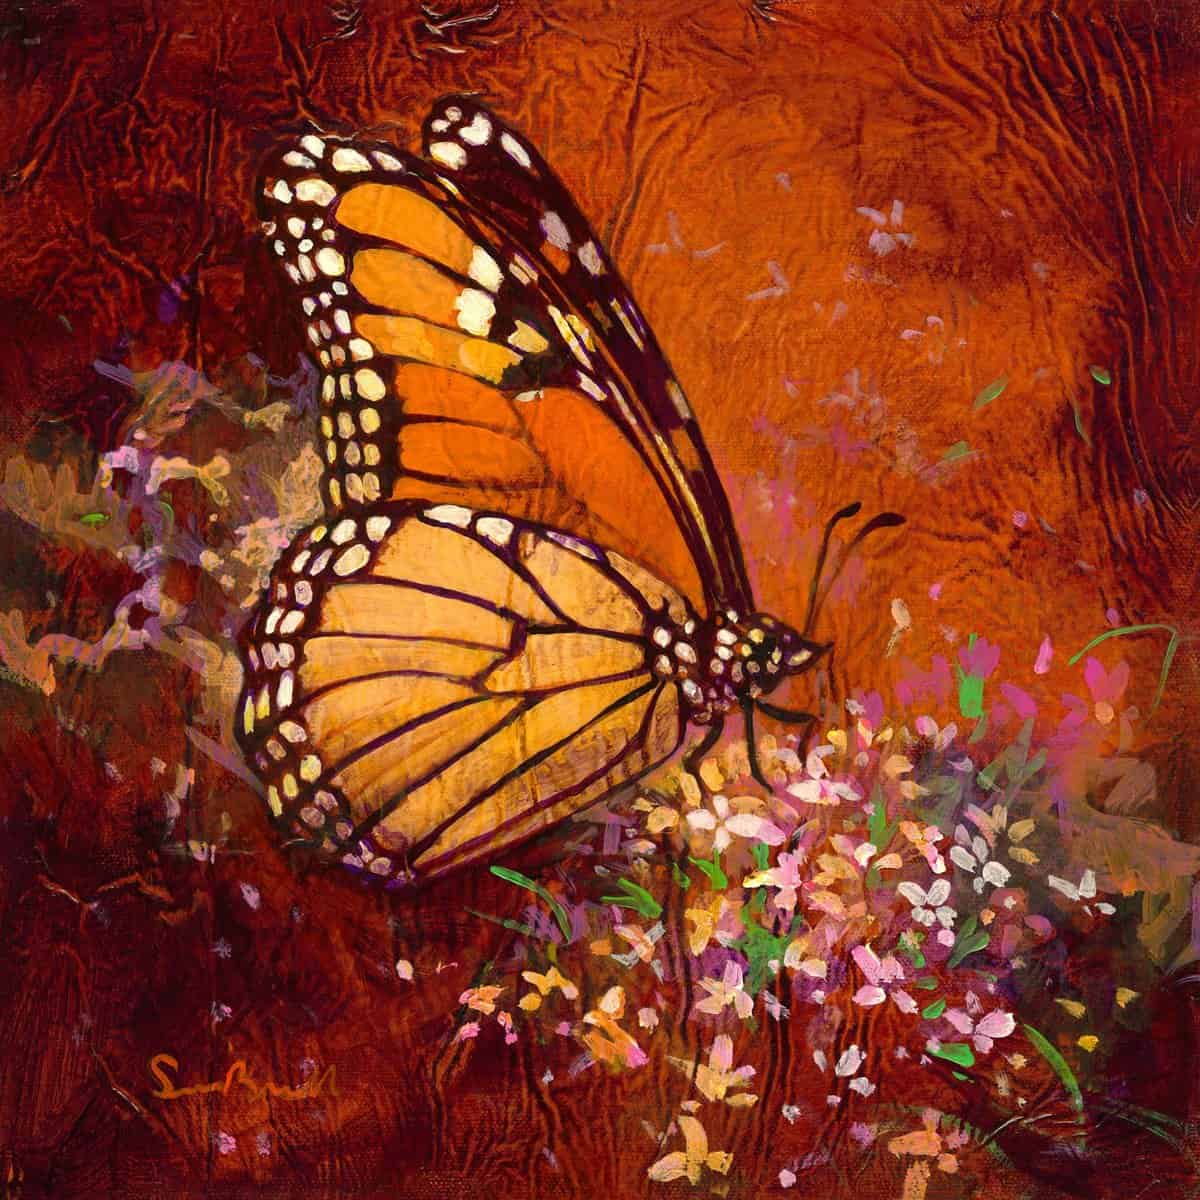 Attractive Butterfly Diamond Art Kits for Adults